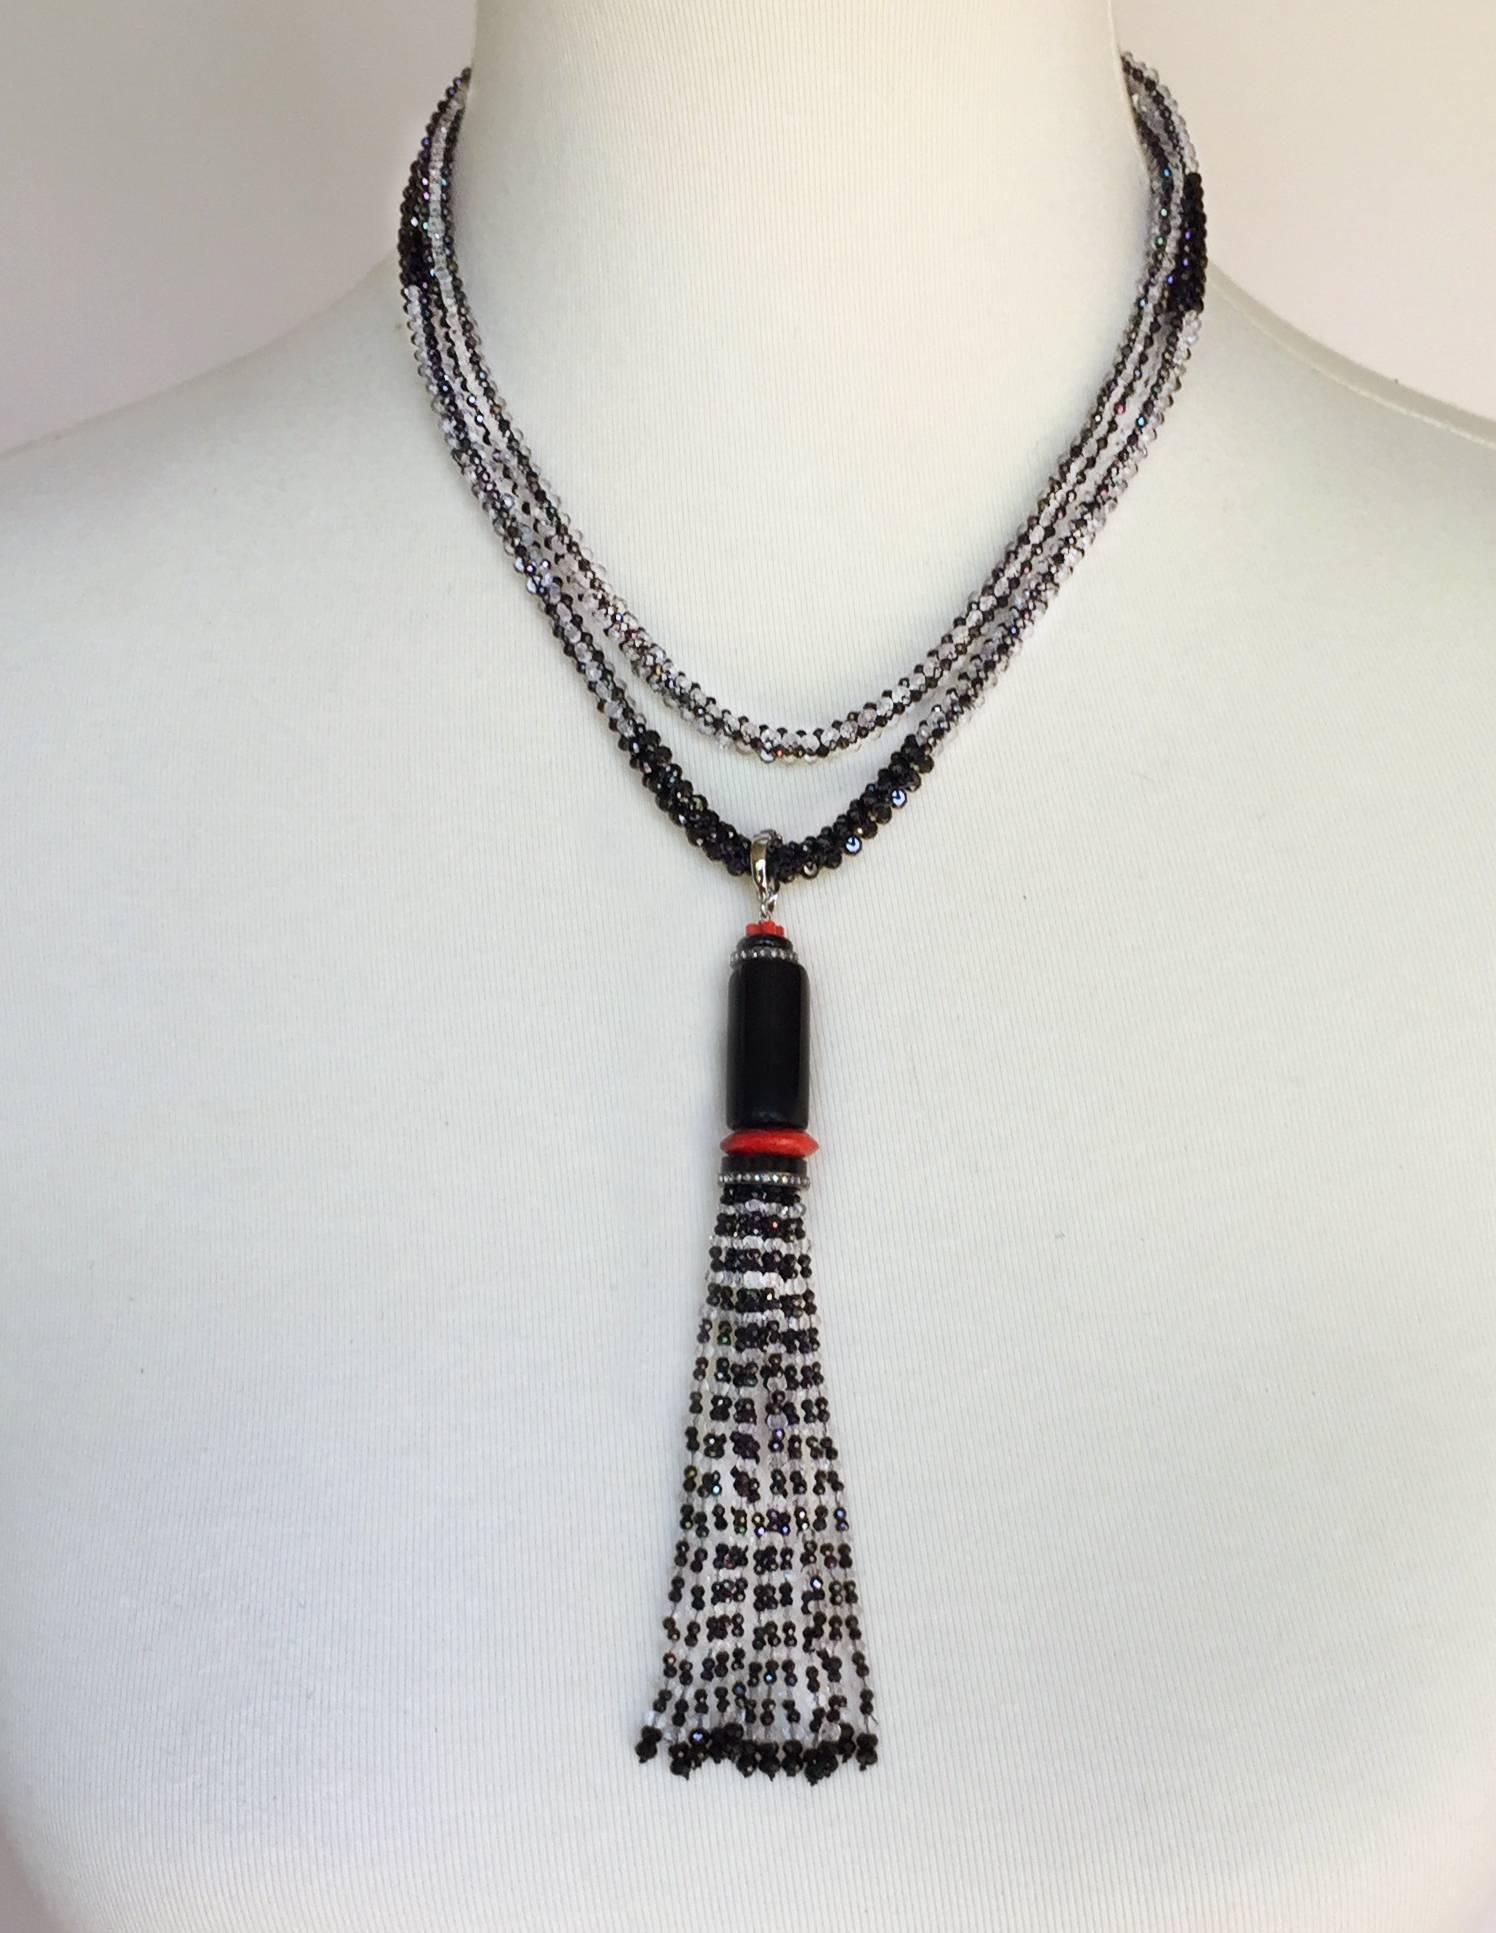 This one of kind Marina J design had a black spinel and white topaz patterned woven rope-like sautoir. The statement tassel sparkles with black spinel and white topaz checkered strands, bringing a modern and elegant touch to the necklace. A large